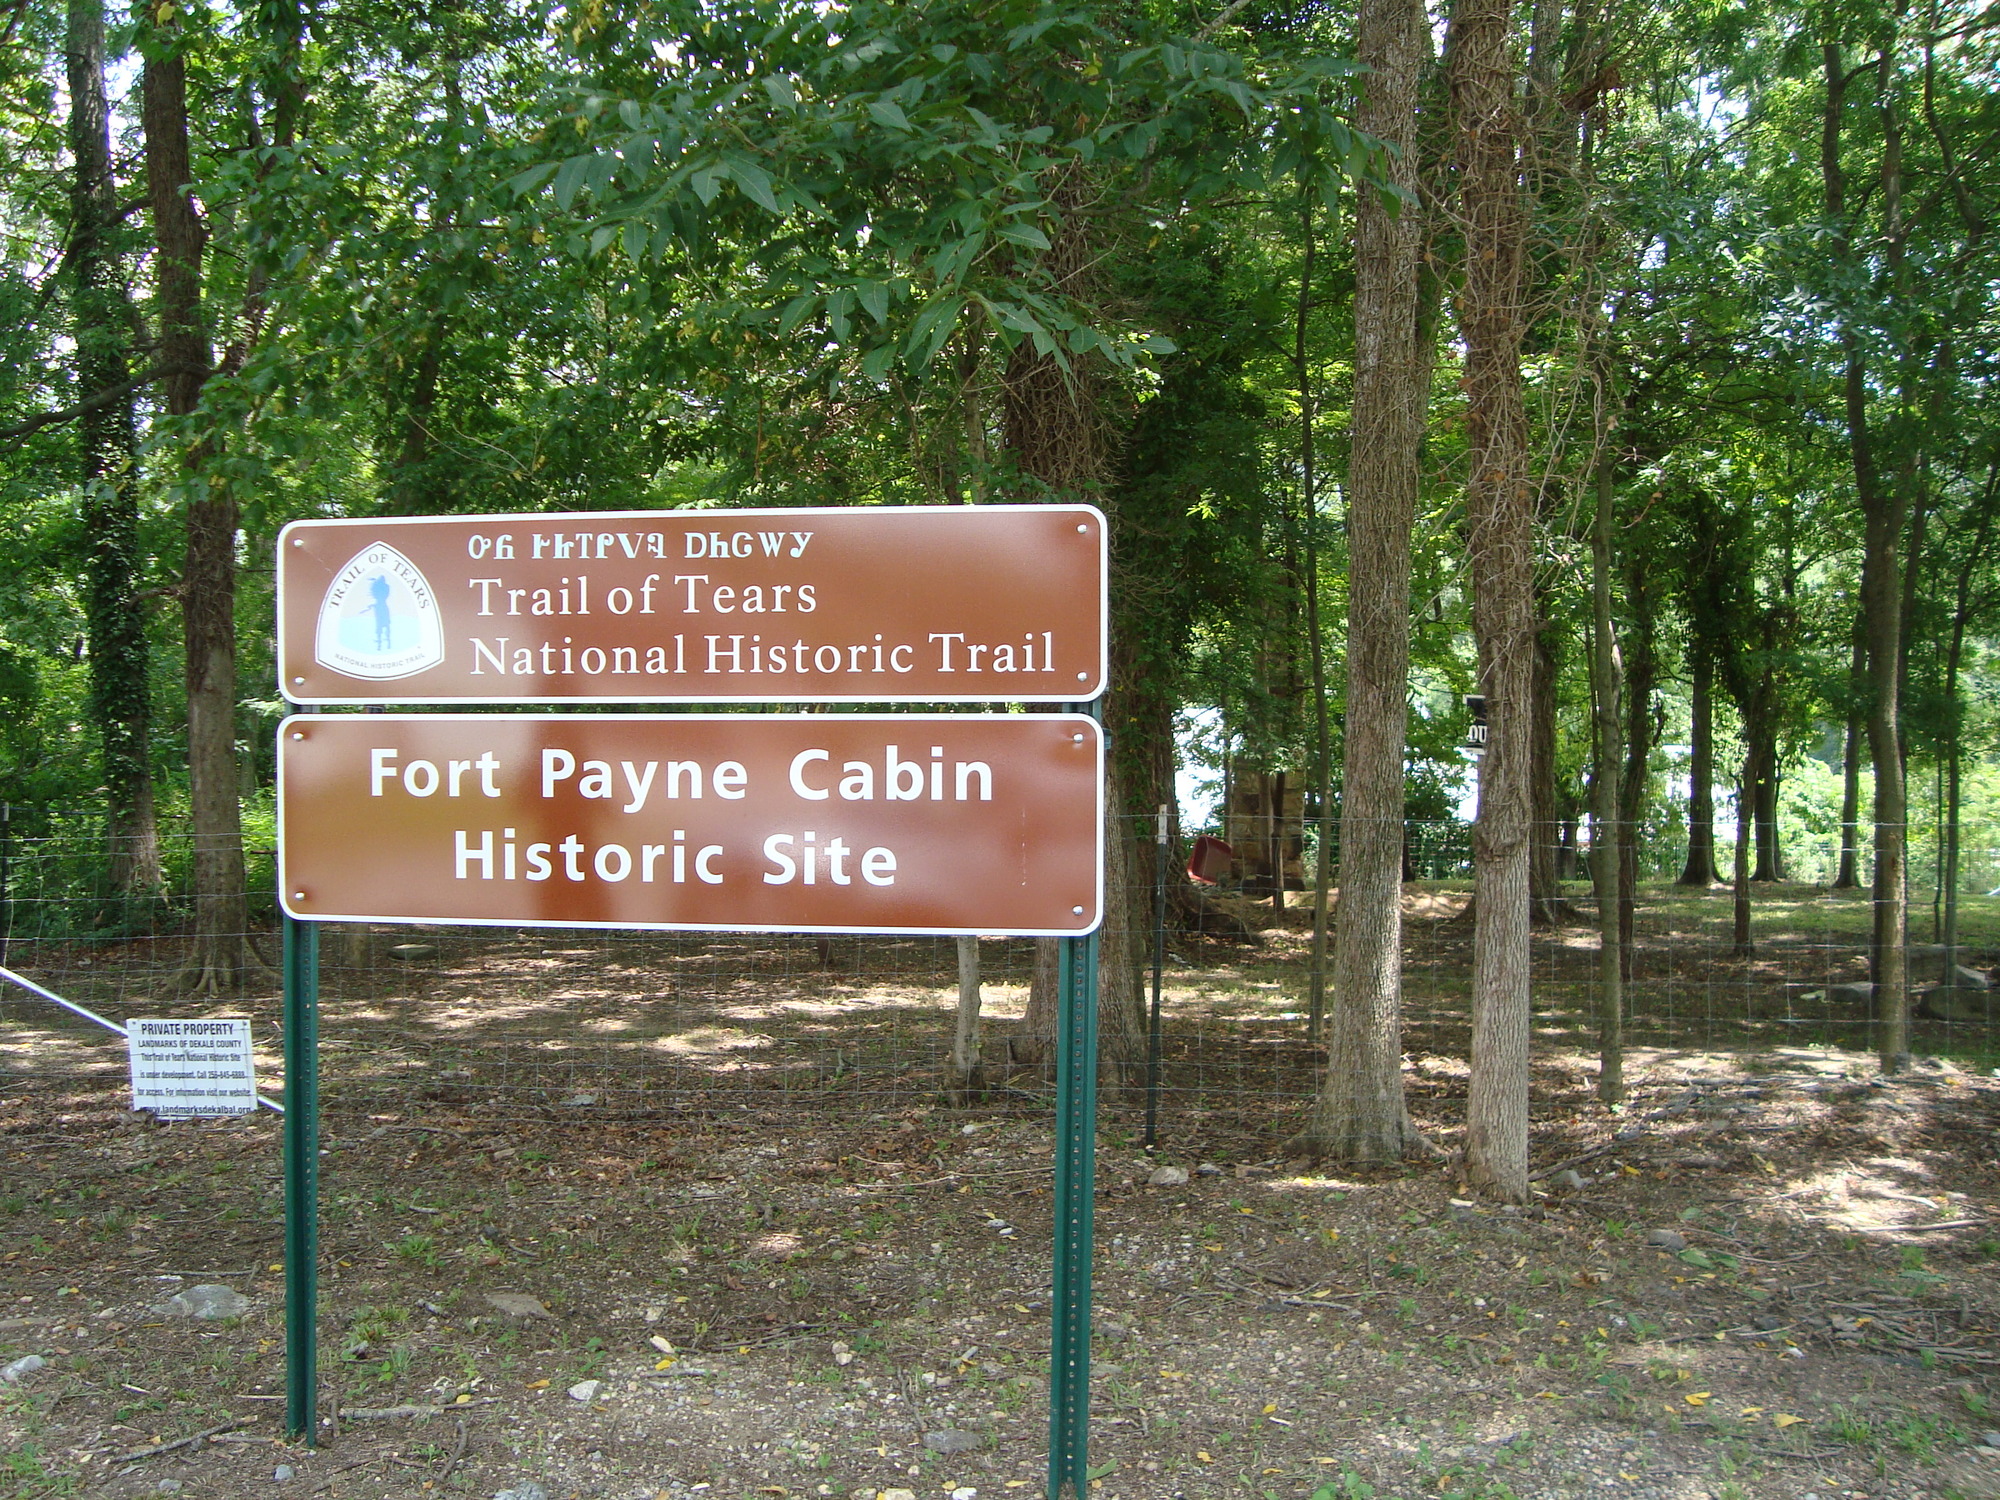 An NTIR Sign marking the location of Fort Payne Cabin Historic Site in Fort Payne, Alabama